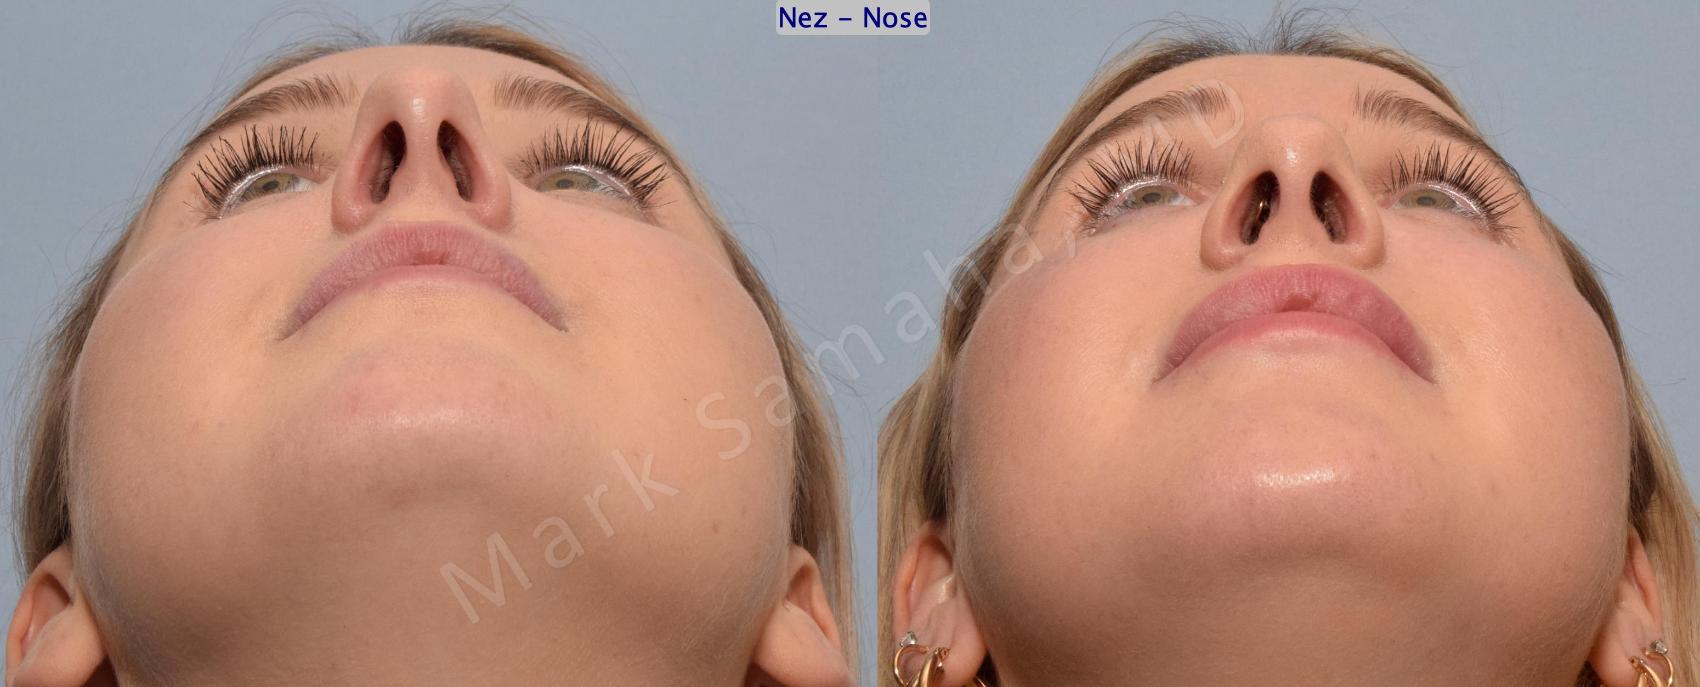 Before & After Rhinoplastie / Rhinoplasty Case 188 Basal View in Montreal, QC